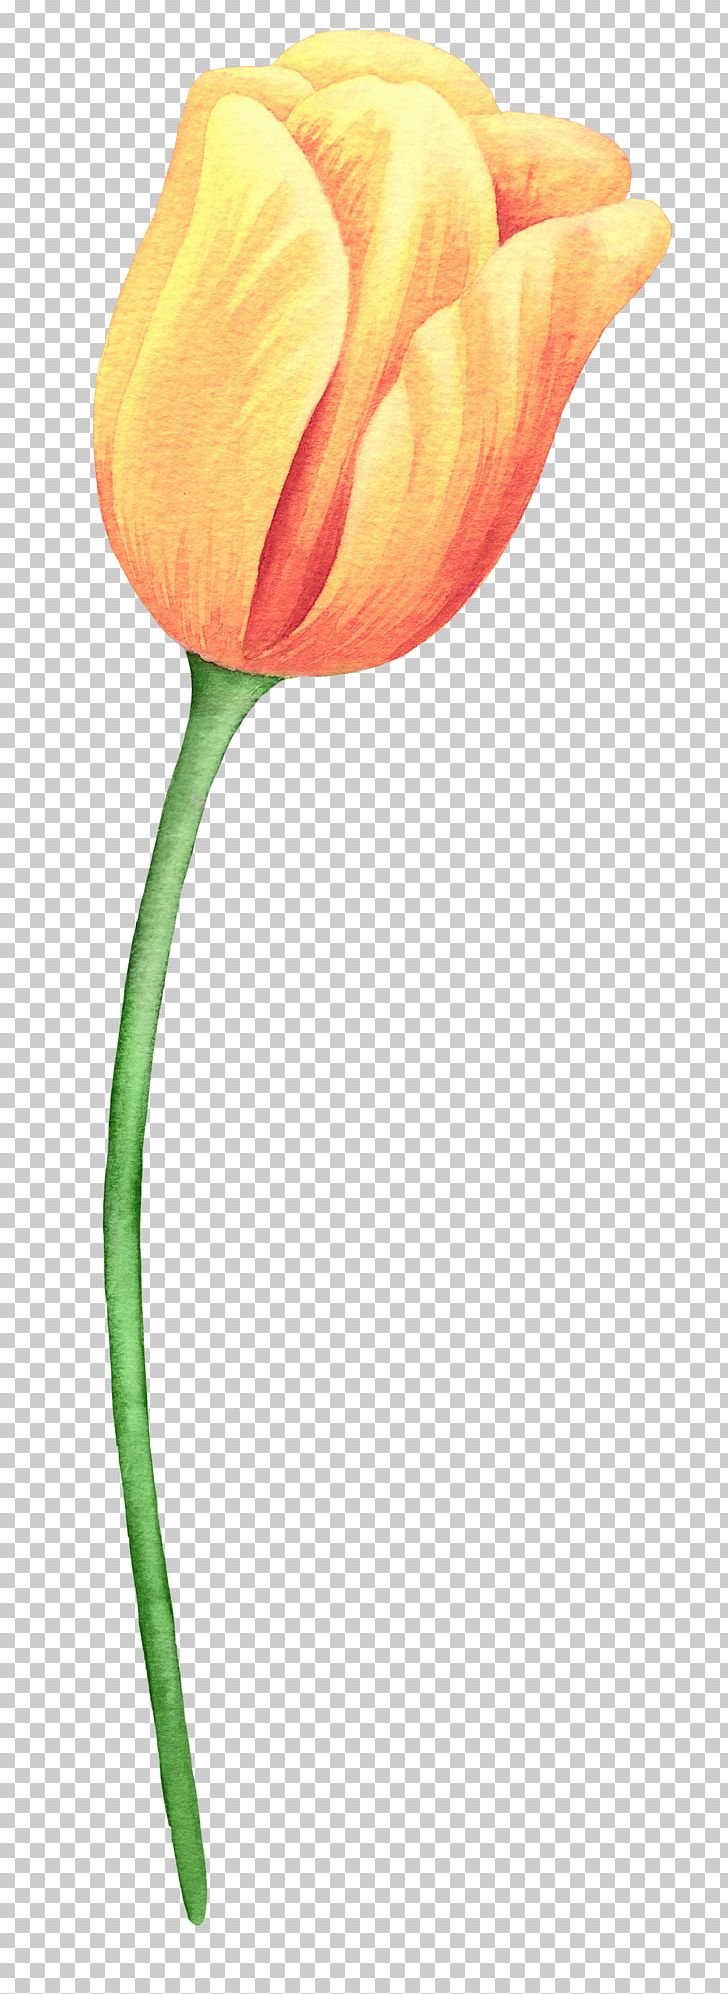 Tulip Flower Painting PNG, Clipart, Bud, Download, Flower, Flowering Plant, Flowers Free PNG Download